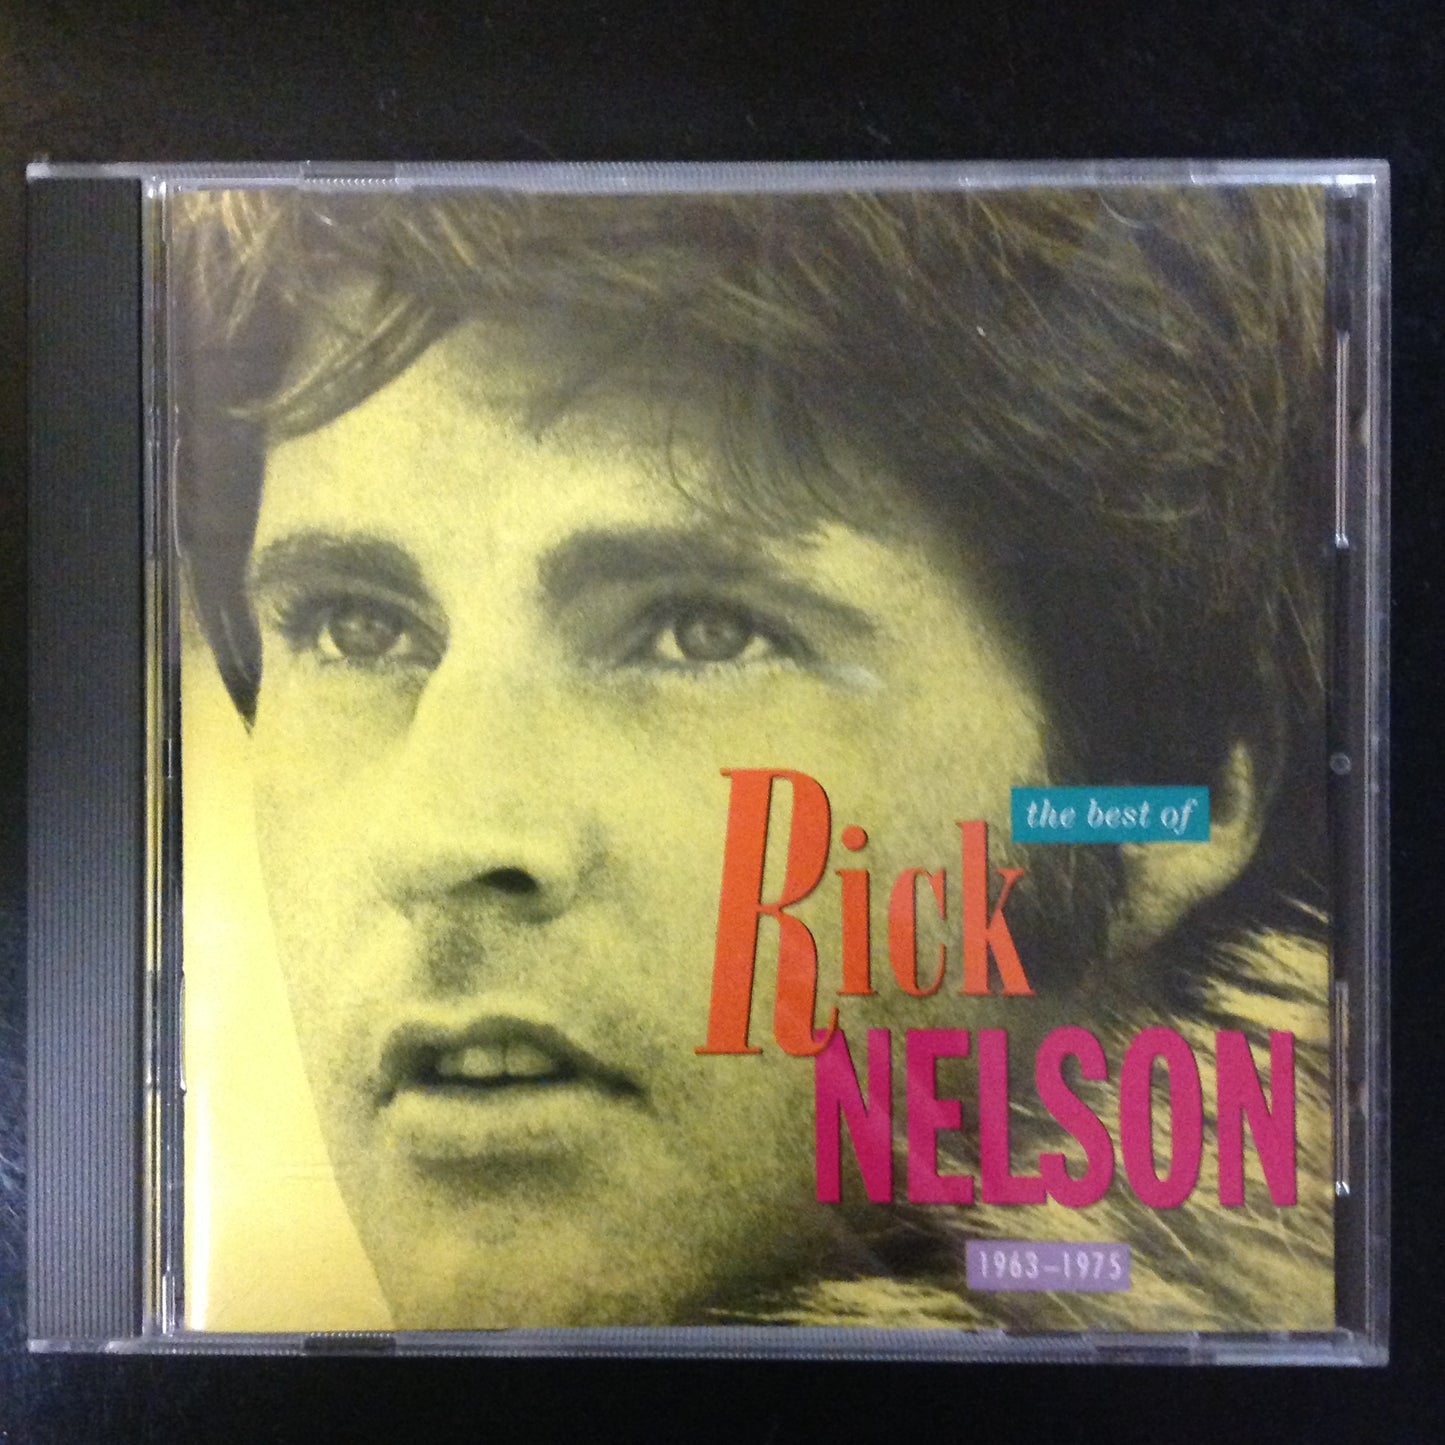 CD The Best Of Rick Nelson 1963-1975 MCAD-10098 Folk Pop World Country